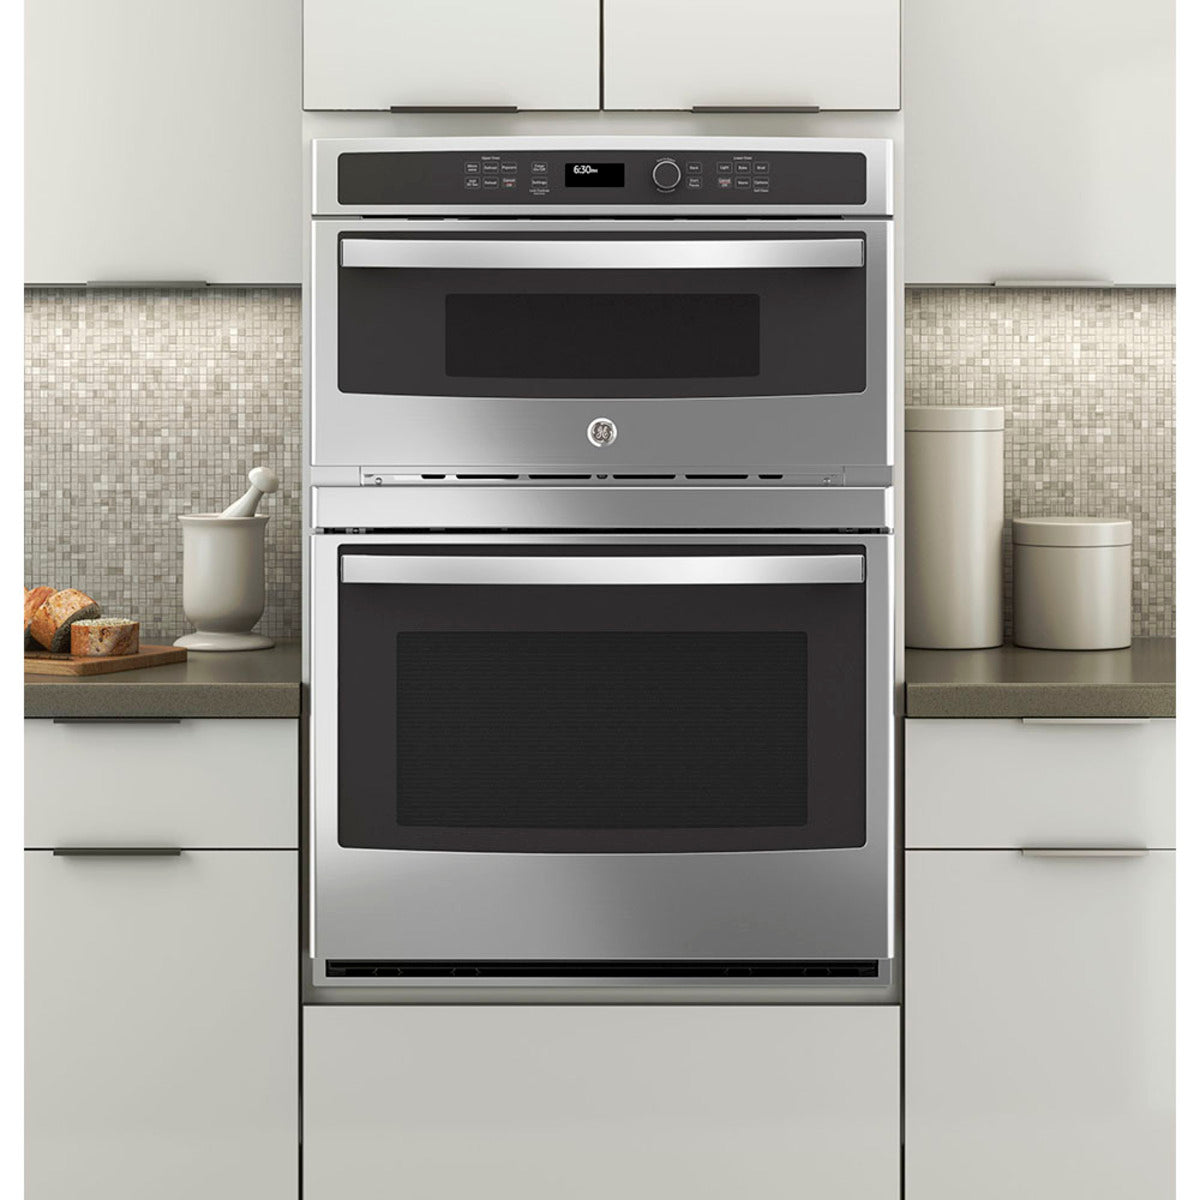 GE - 6.7 cu. ft Combination Wall Oven in Stainless - JT3800SHSS